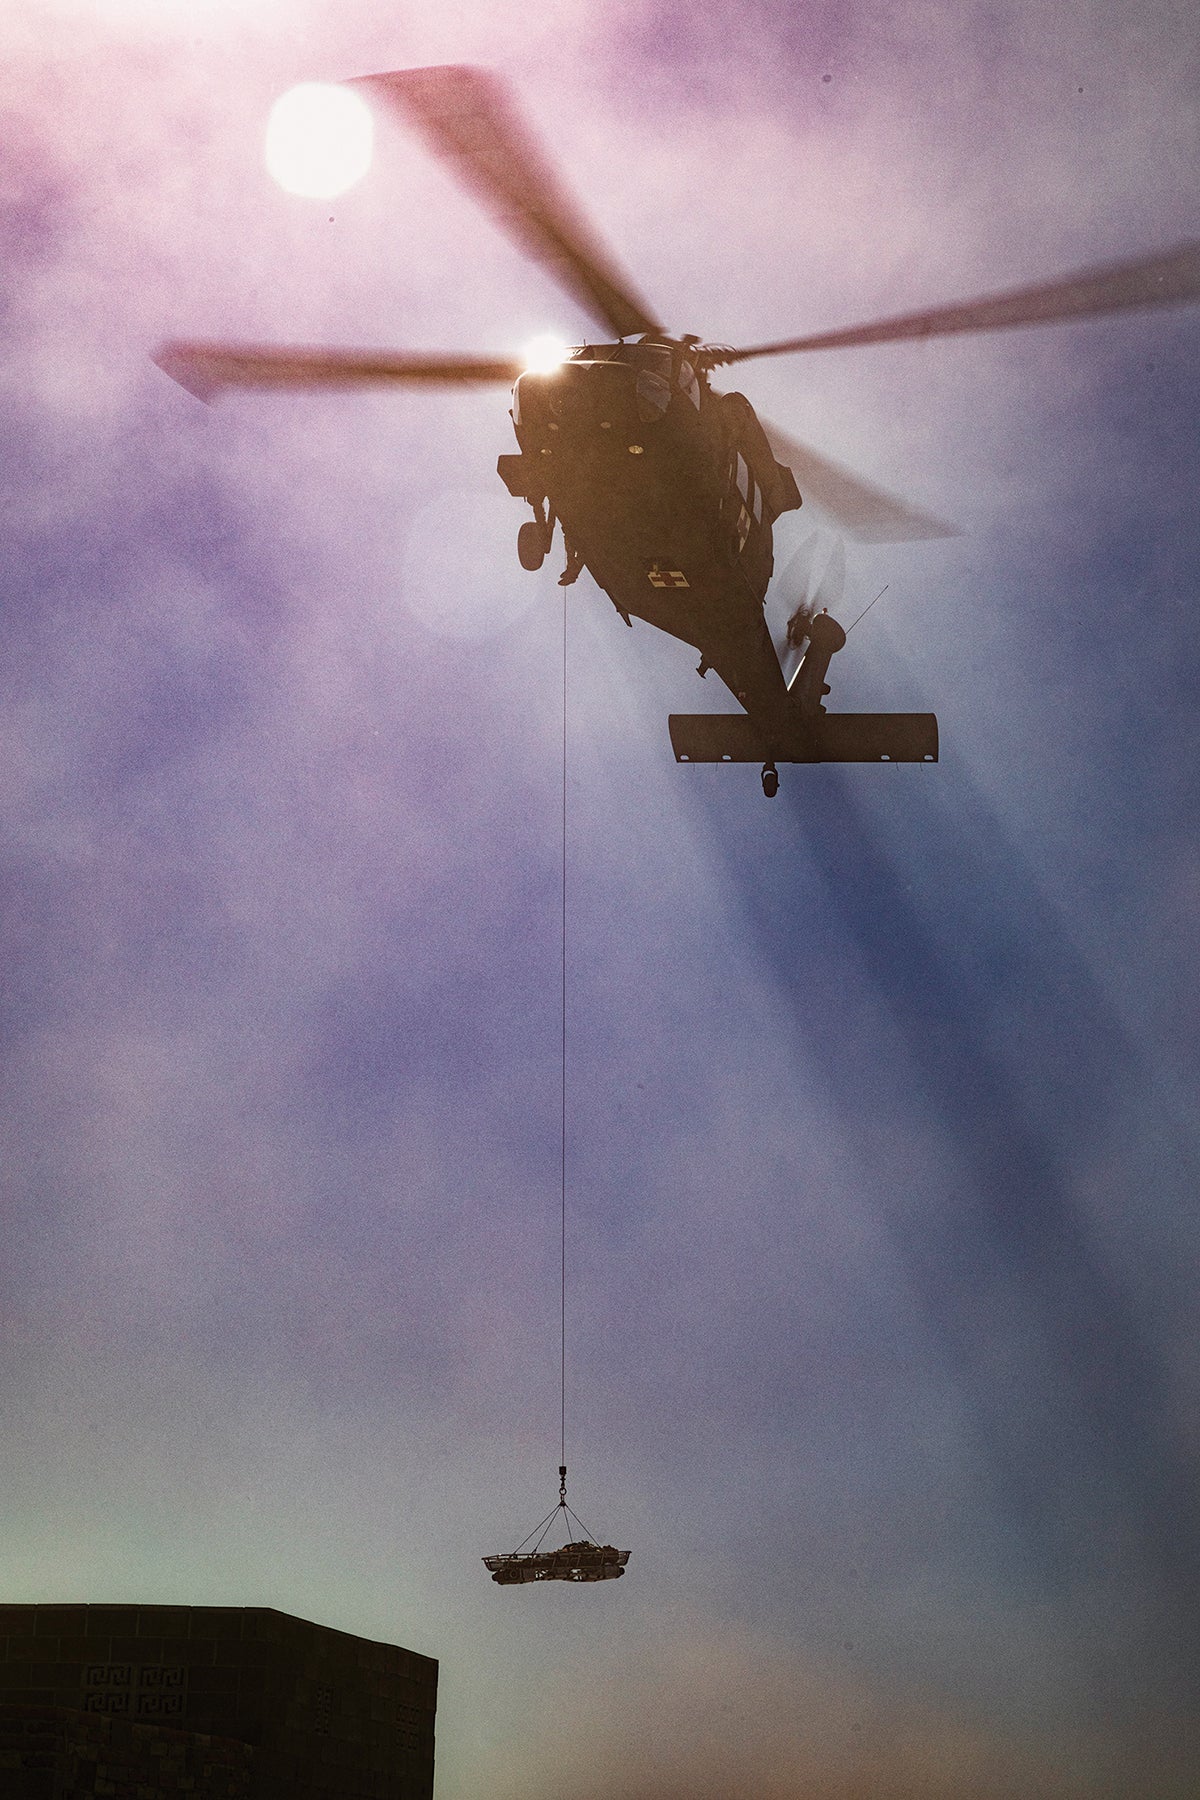 A UH-60 Black Hawk helicopter demonstrates a litter hoist system during Project Convergence 2021 at Yuma Proving Ground, Arizona. (Credit: U.S. Army Scott Childress)